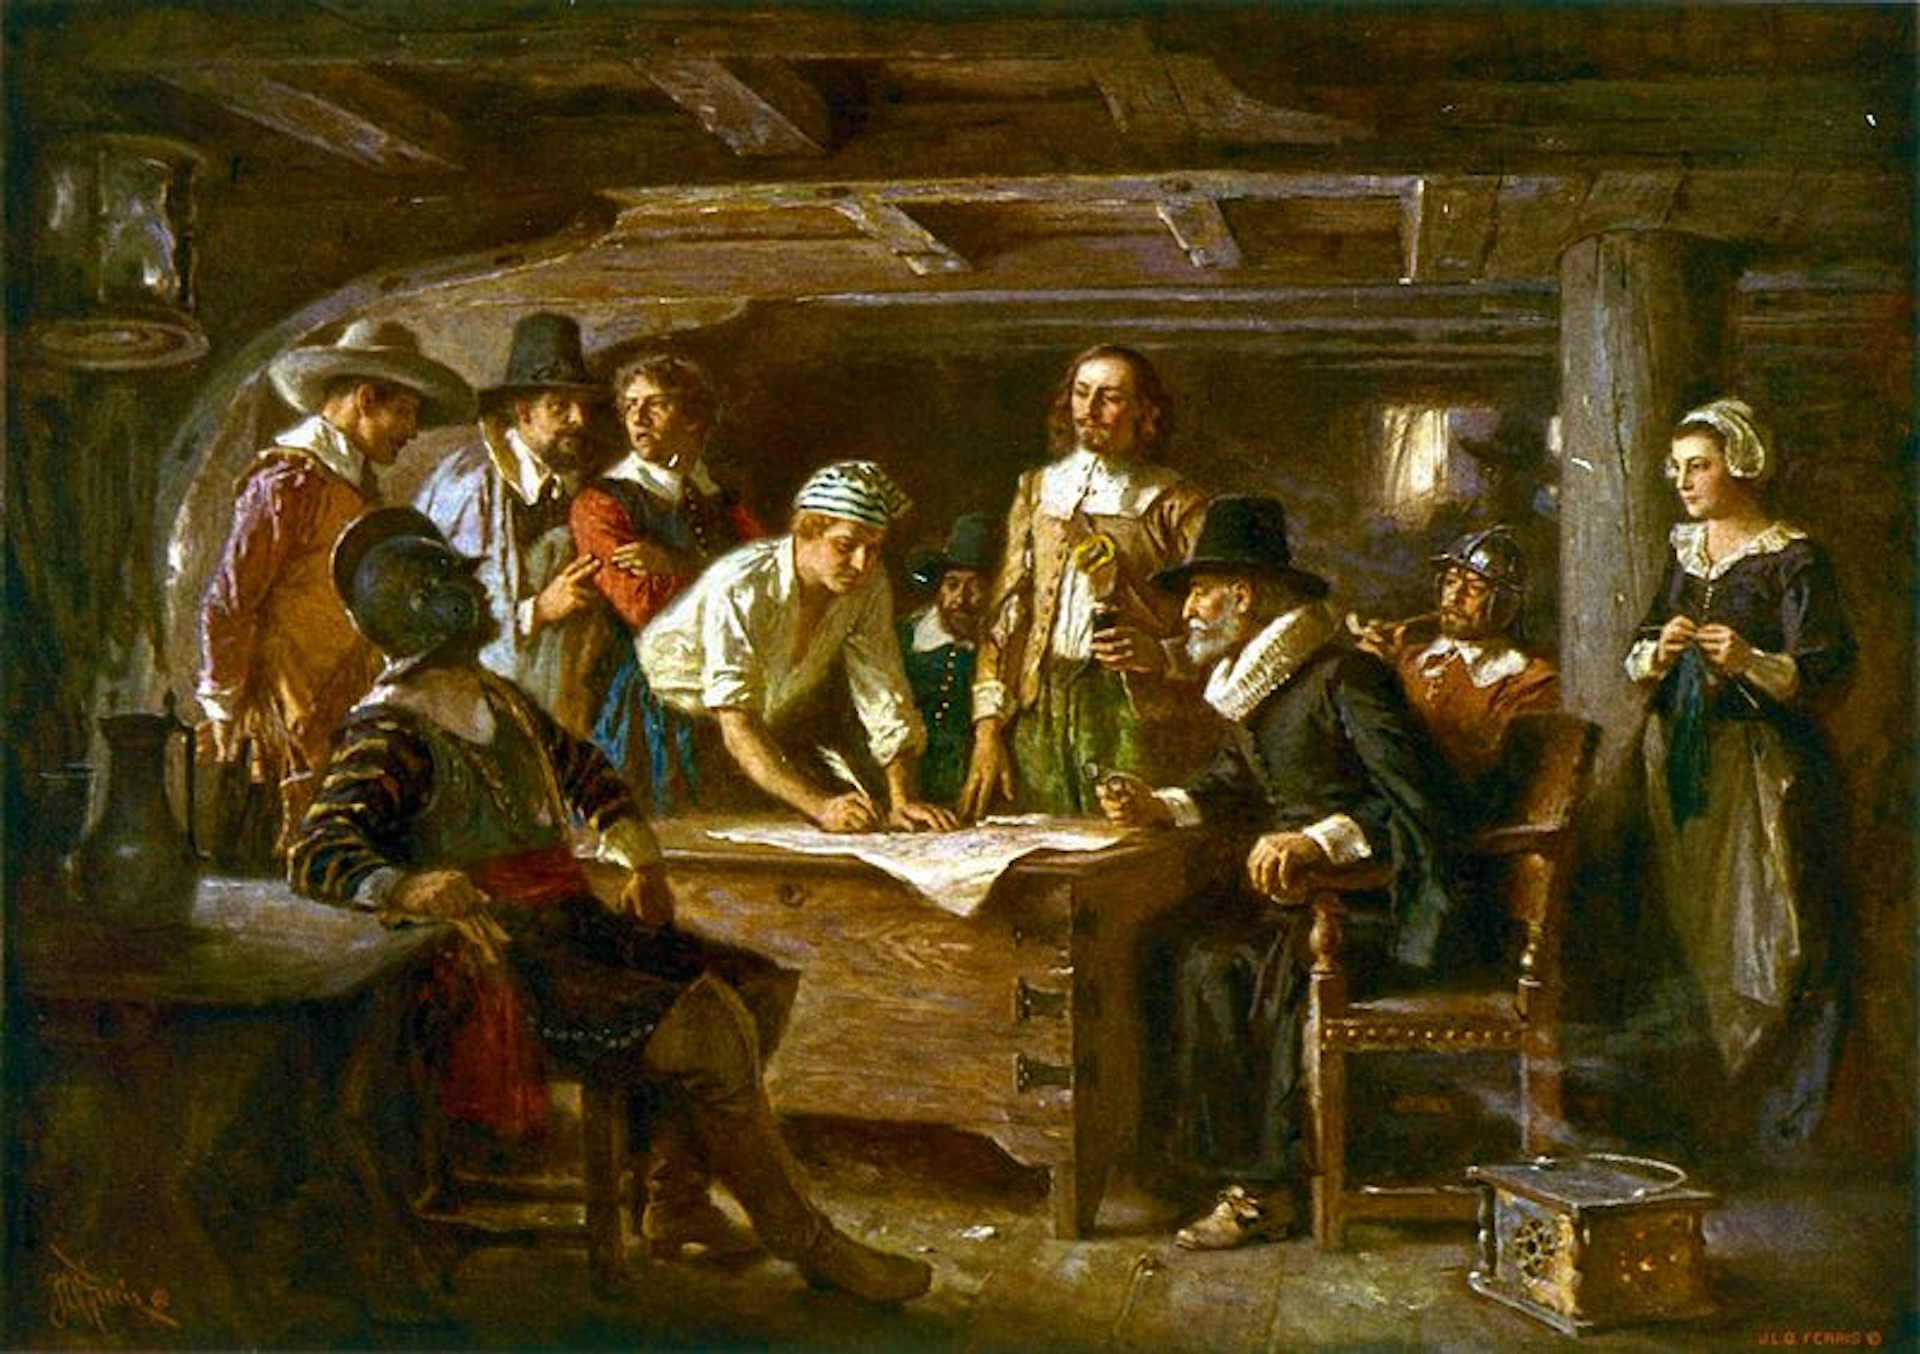 The signatories of the Mayflower Compact aboard the Mayflower.